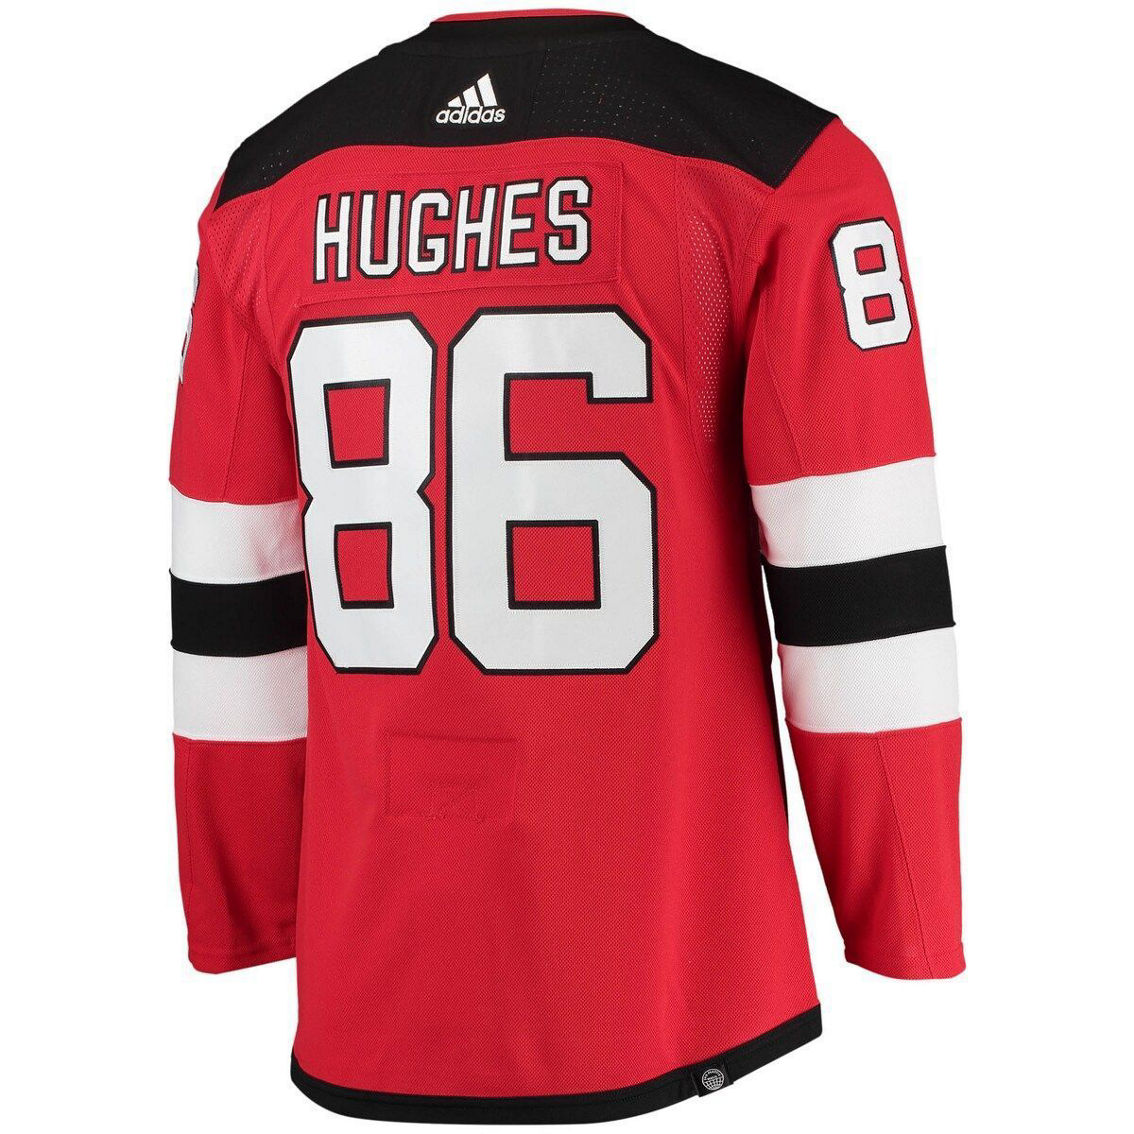 adidas Men's Jack Hughes Red New Jersey Devils Home Primegreen Authentic Pro Player Jersey - Image 4 of 4